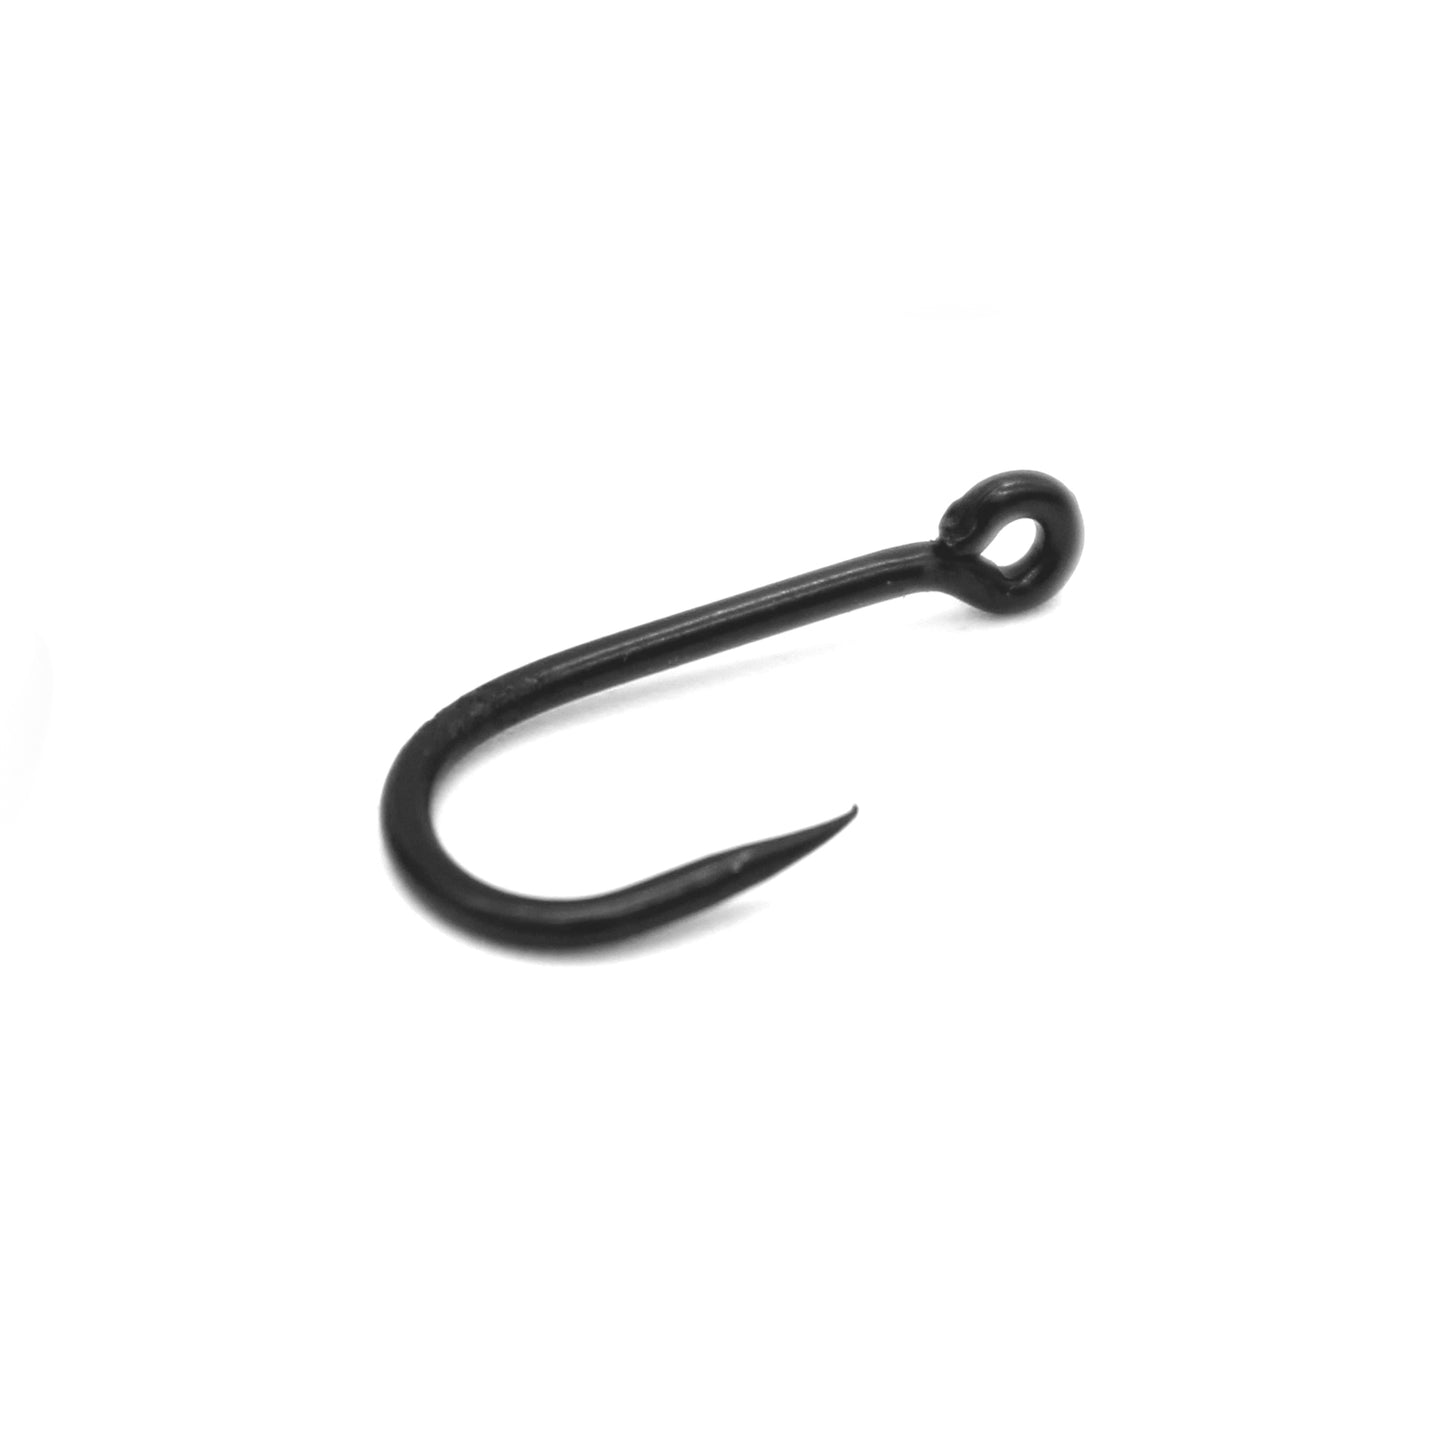 Deception Angling Wide Gape Barbless Fishing Hook